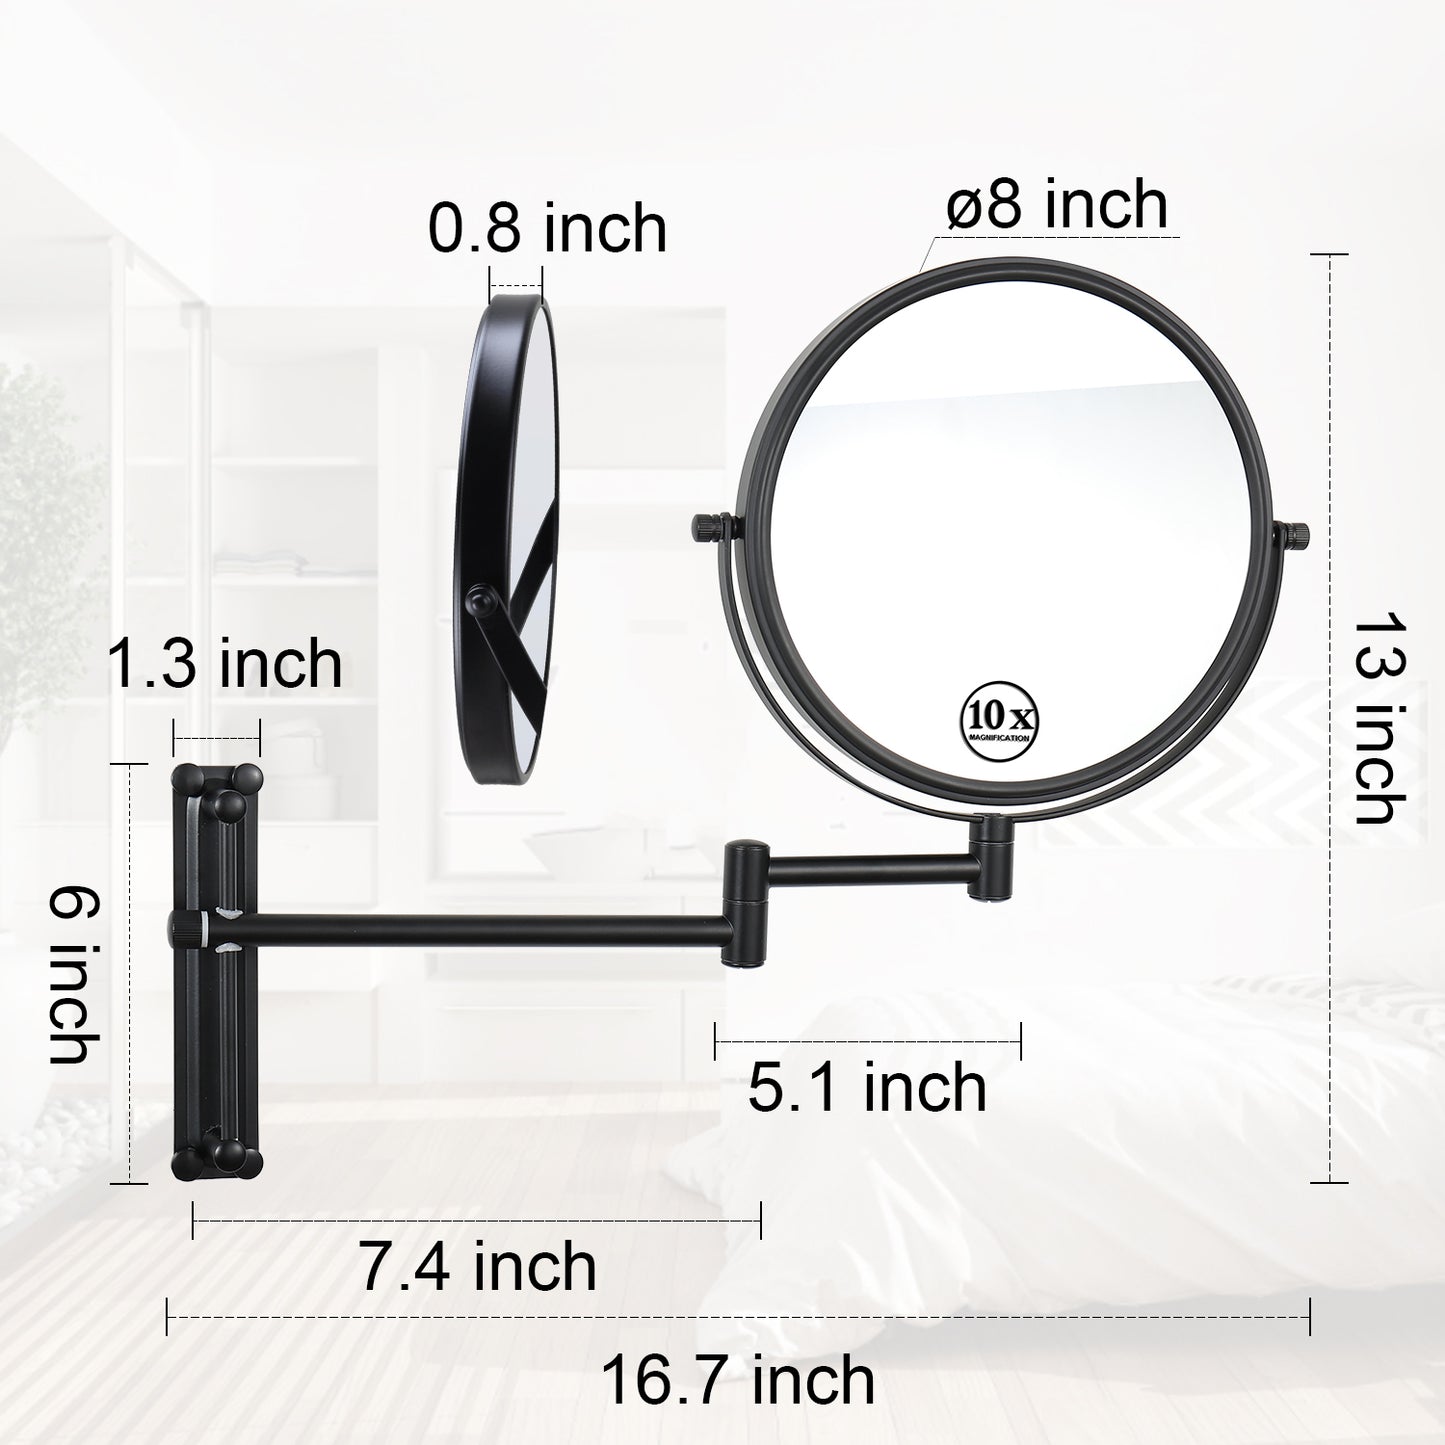 8-inch Wall Mounted Makeup Vanity Mirror, Height Adjustable, 1X / 10X Magnification Mirror, 360° Swivel with Extension Arm (Black)